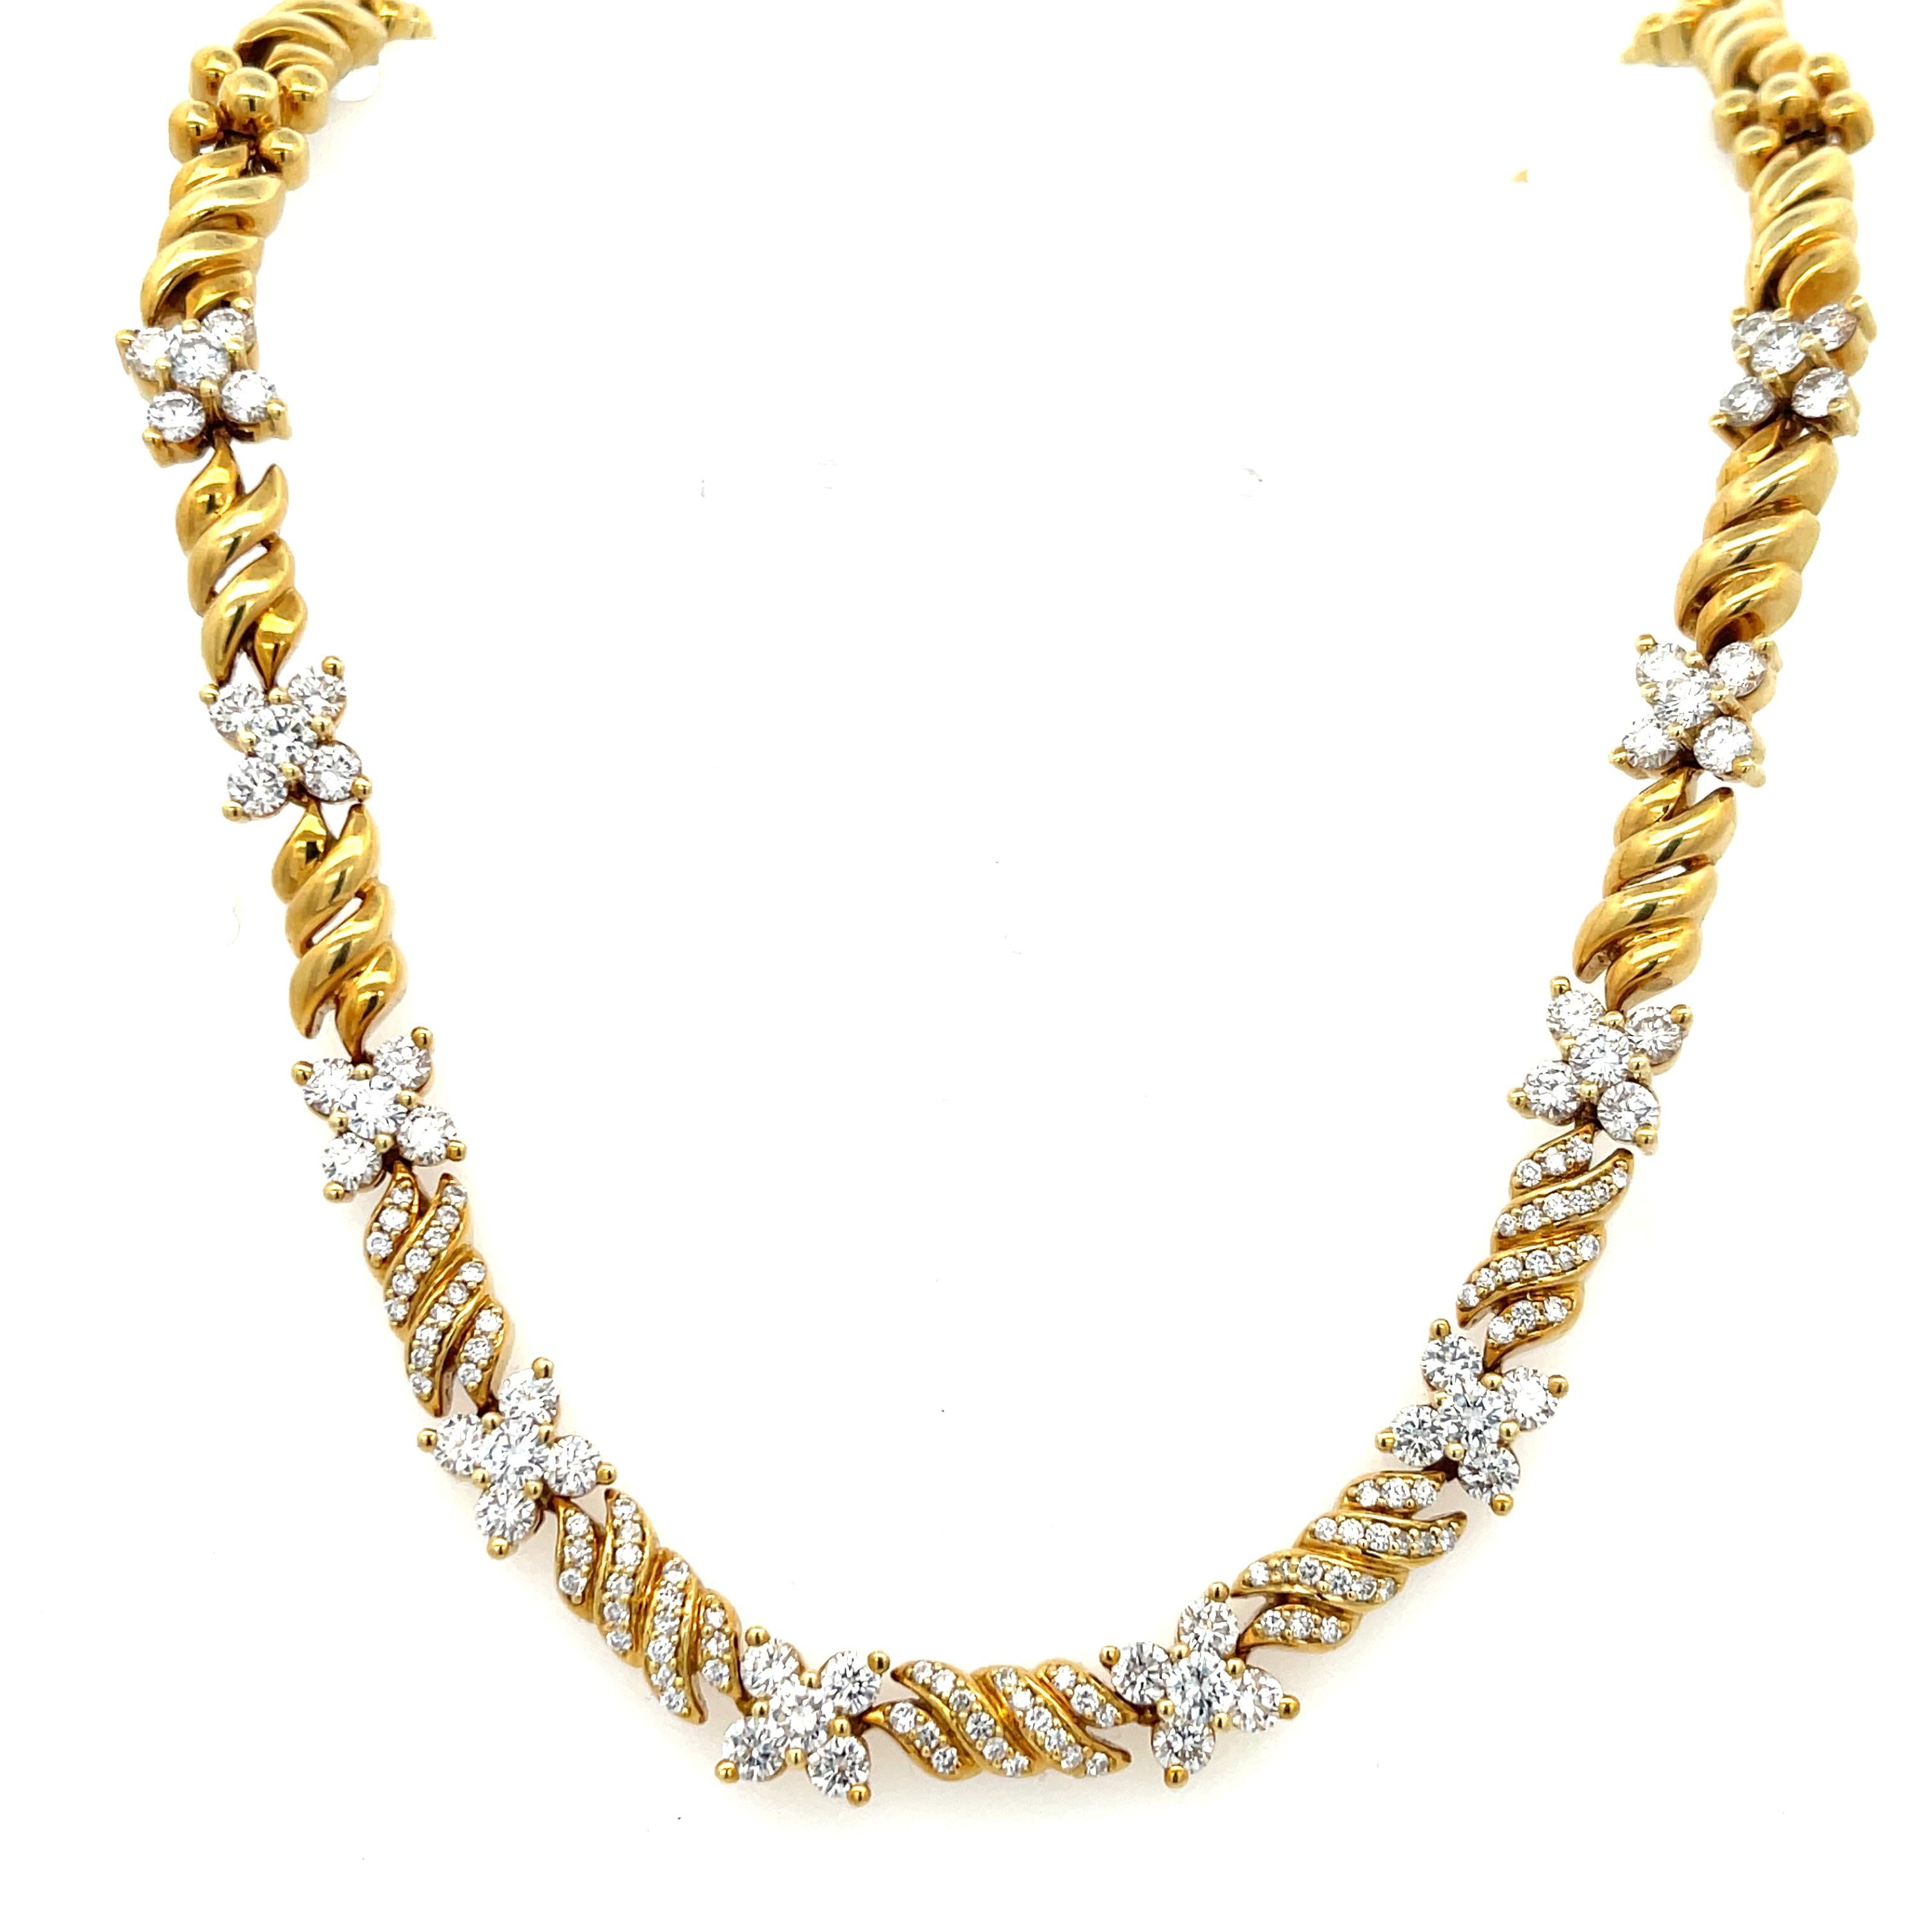 Jose Hess Floret 6.50ctw Diamond Necklace 18K Yellow Gold In Excellent Condition For Sale In Dallas, TX